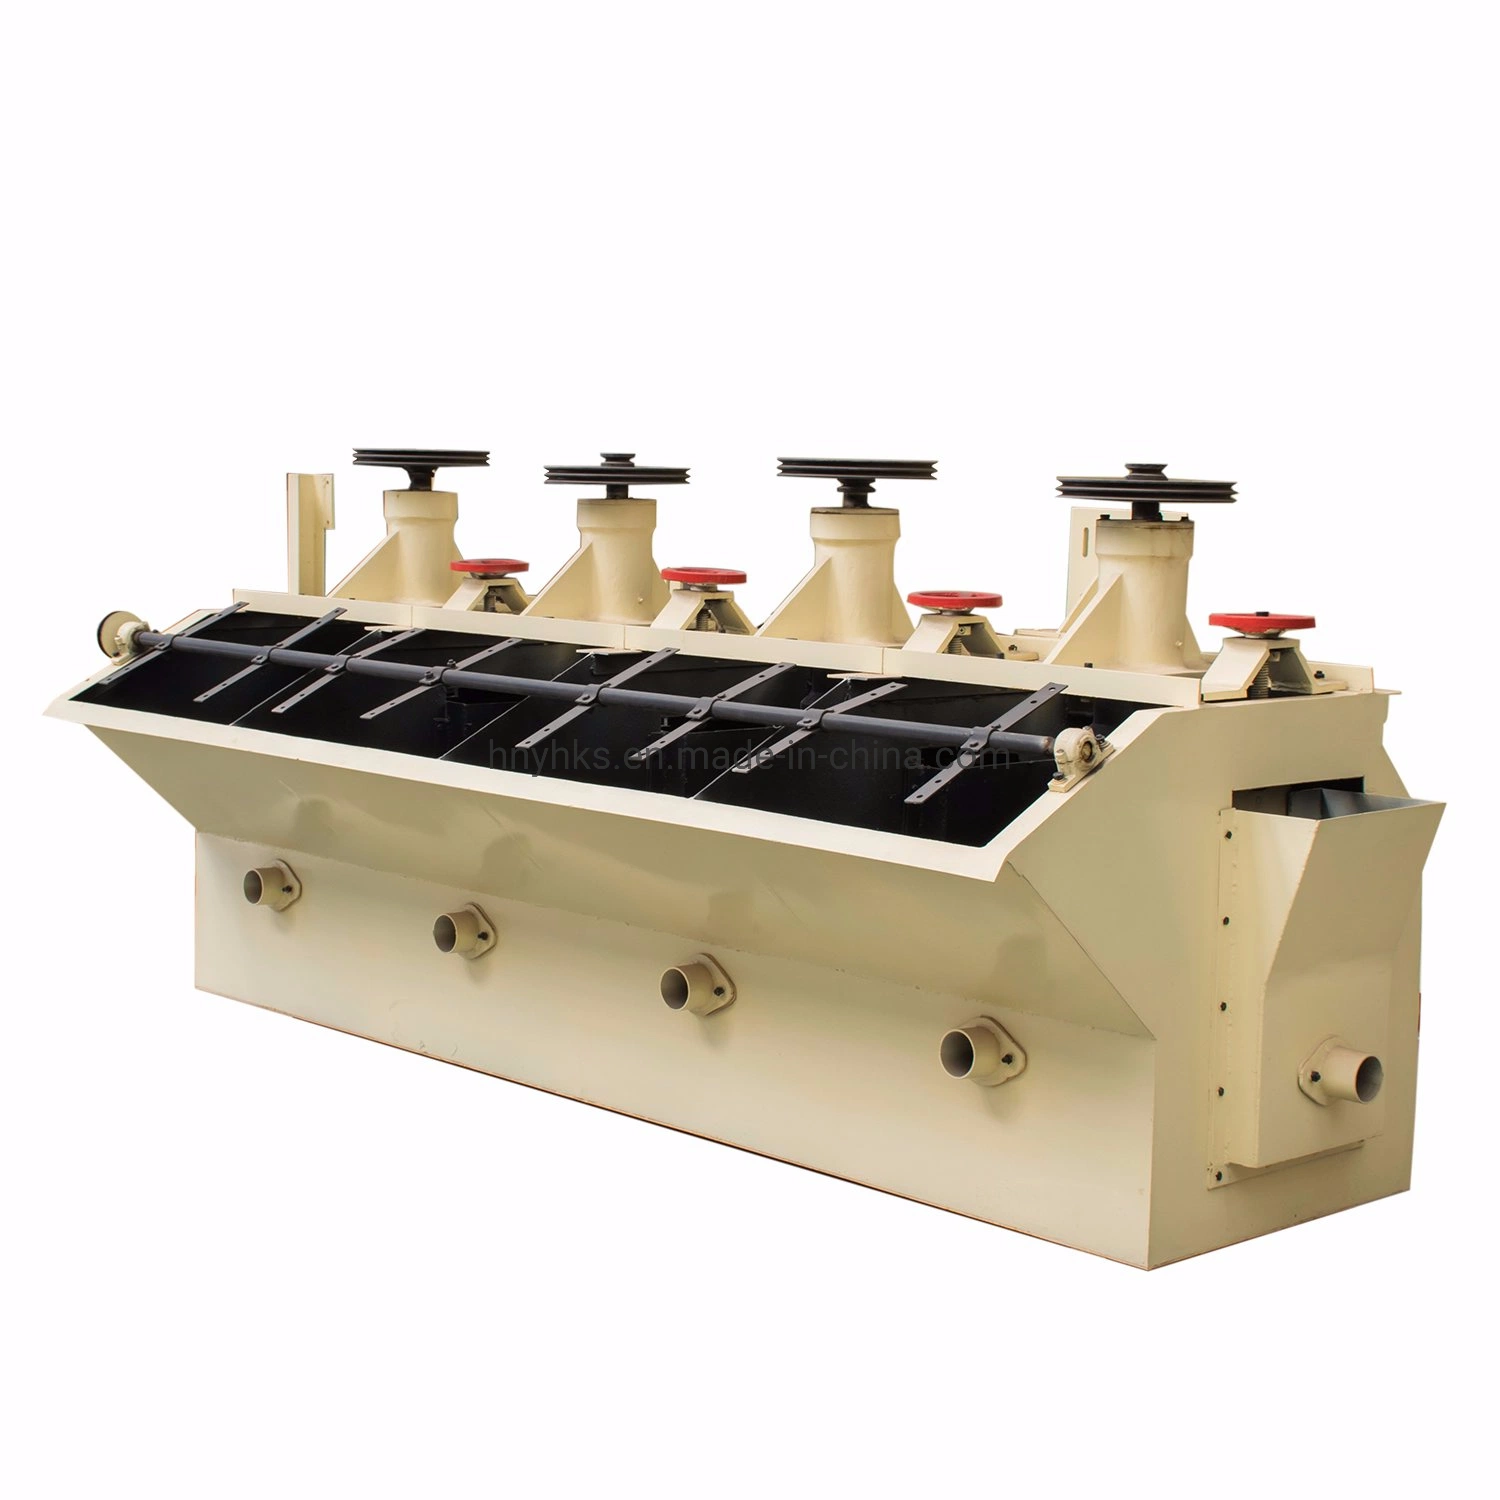 Froth Flotation Machine/Mineral Processing Flotation Unit/ Flotation Cell/ Flotation Tank/Flotation Separator/Small Scale Gold Copper Mining Equipment